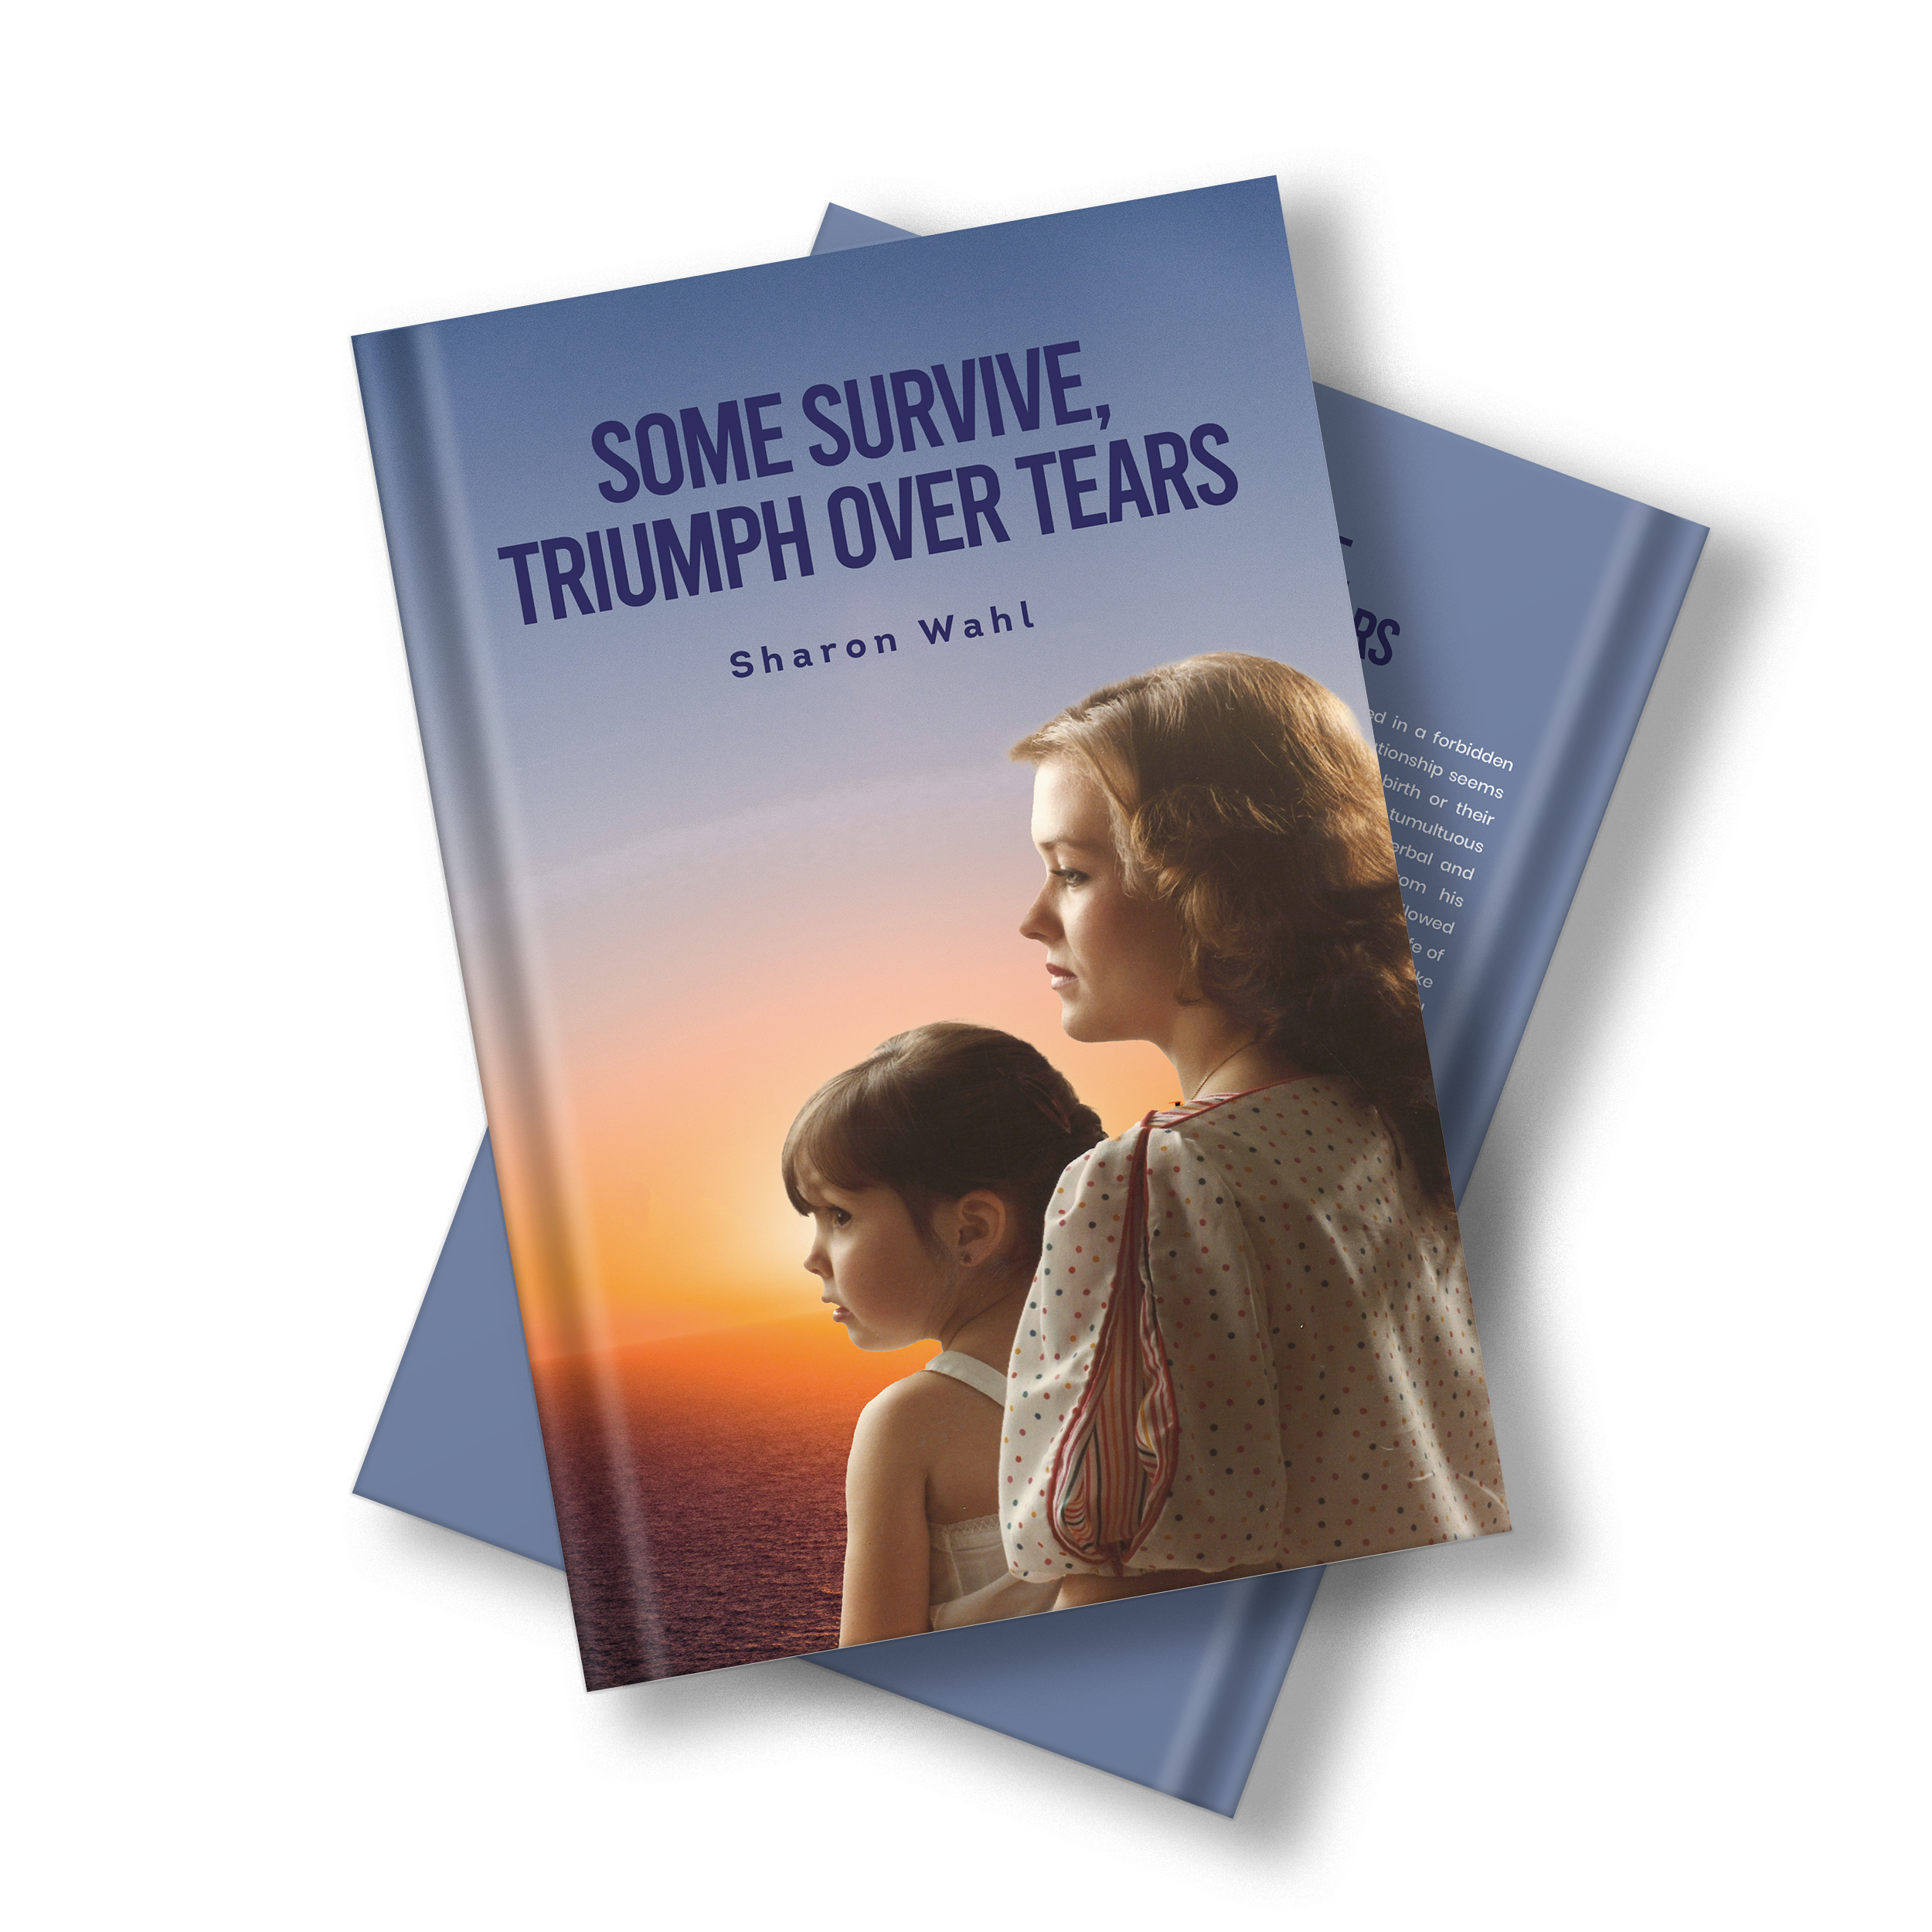 ‘Some Survive, Triumph Over Tears’ is a poignant exploration of domestic abuse and abortion. 3